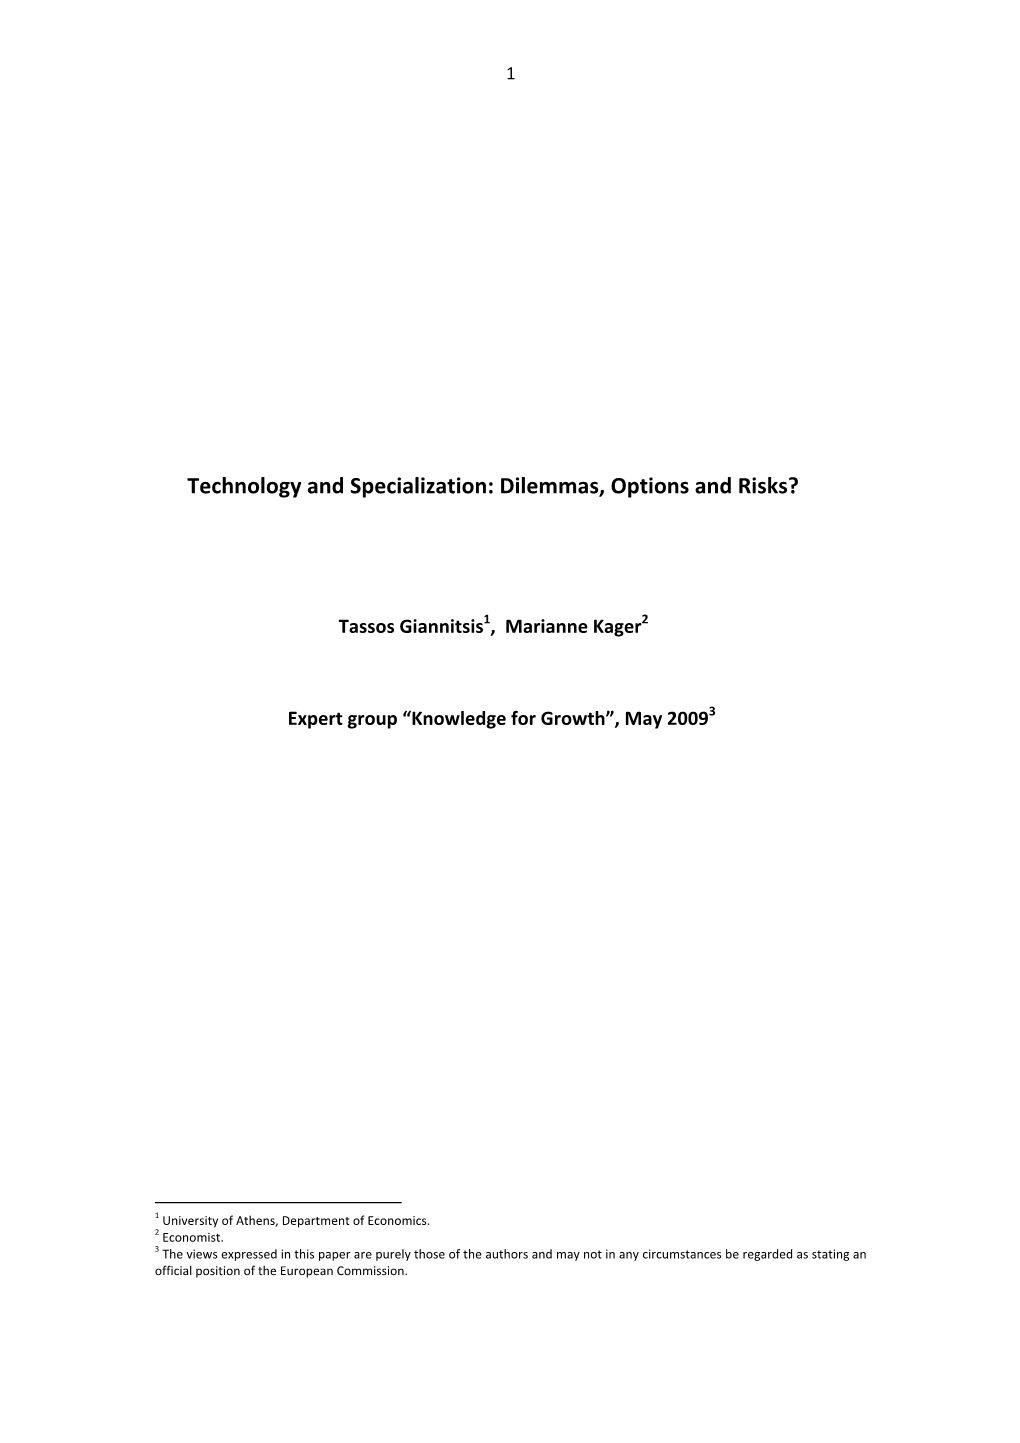 Research and Technology Specialisation Final